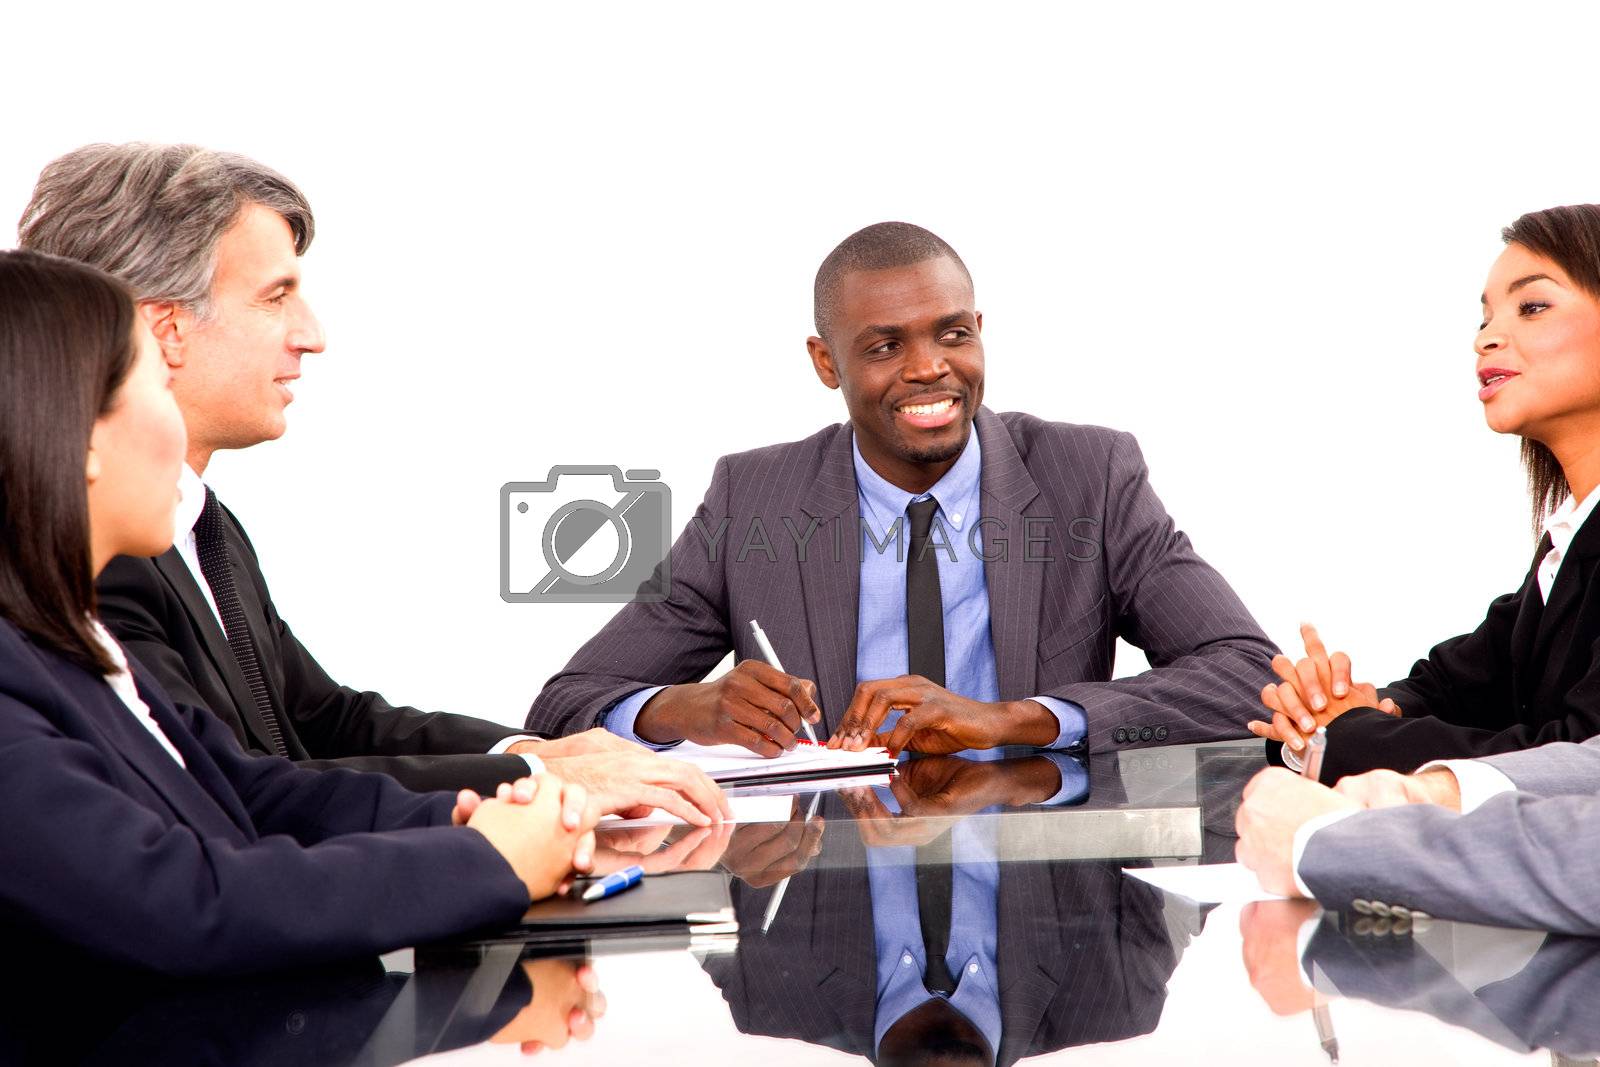 Royalty free image of multi-ethnic team during a meeting by ambro